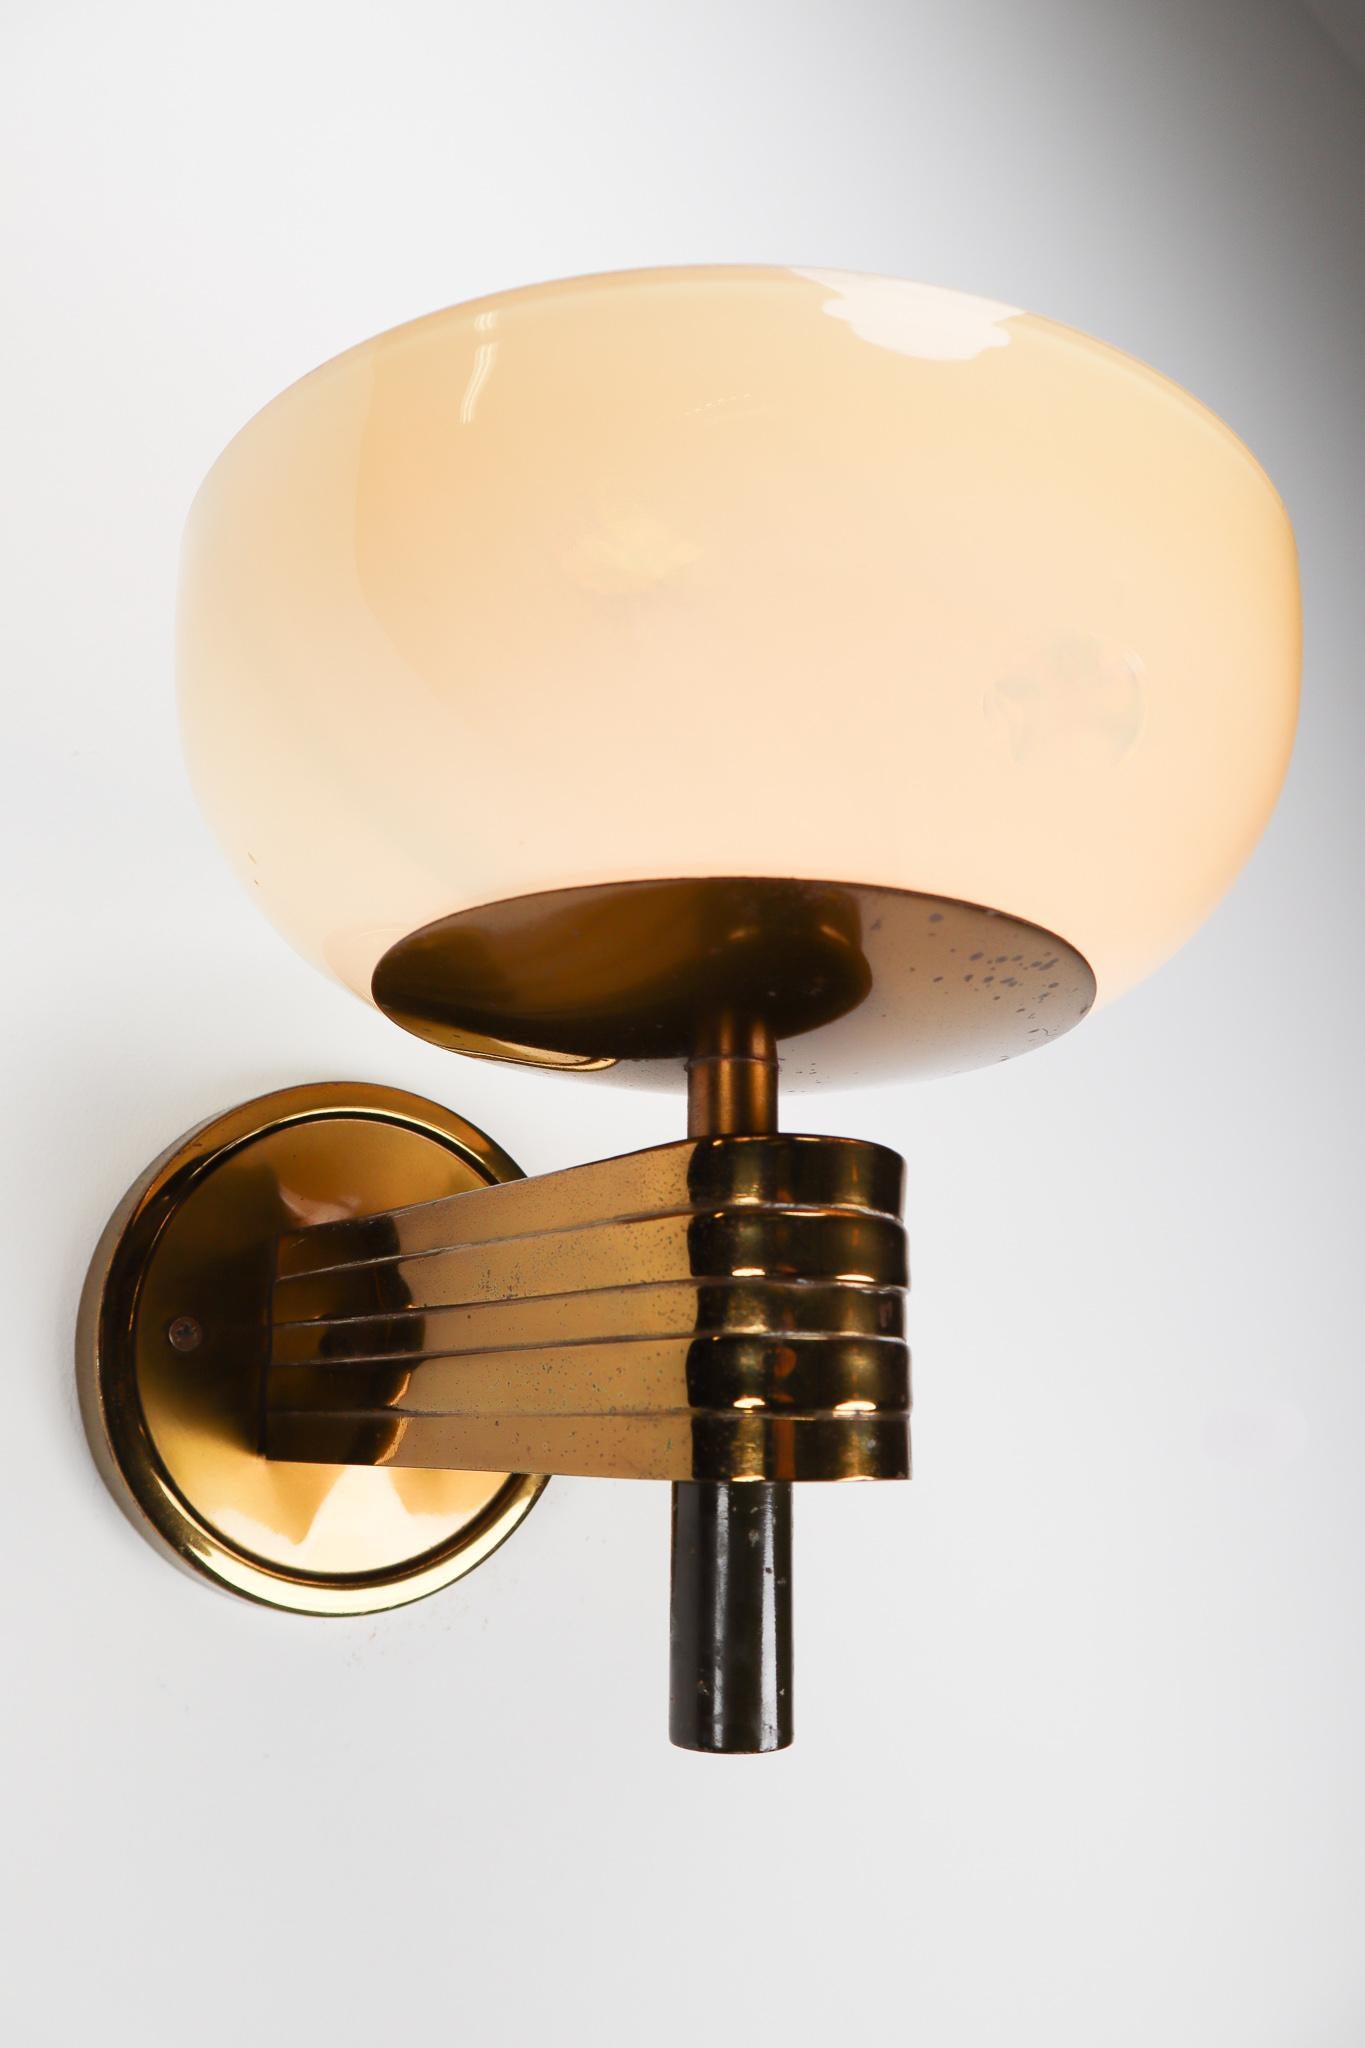 Large Art Deco sconce with opaline glass and brass manufactured in Germany, 1930s. The pleasant light it spreads is very atmospheric, these wall scones will contribute to a luxurious character of the (hotel-bar) interior. Good original condition